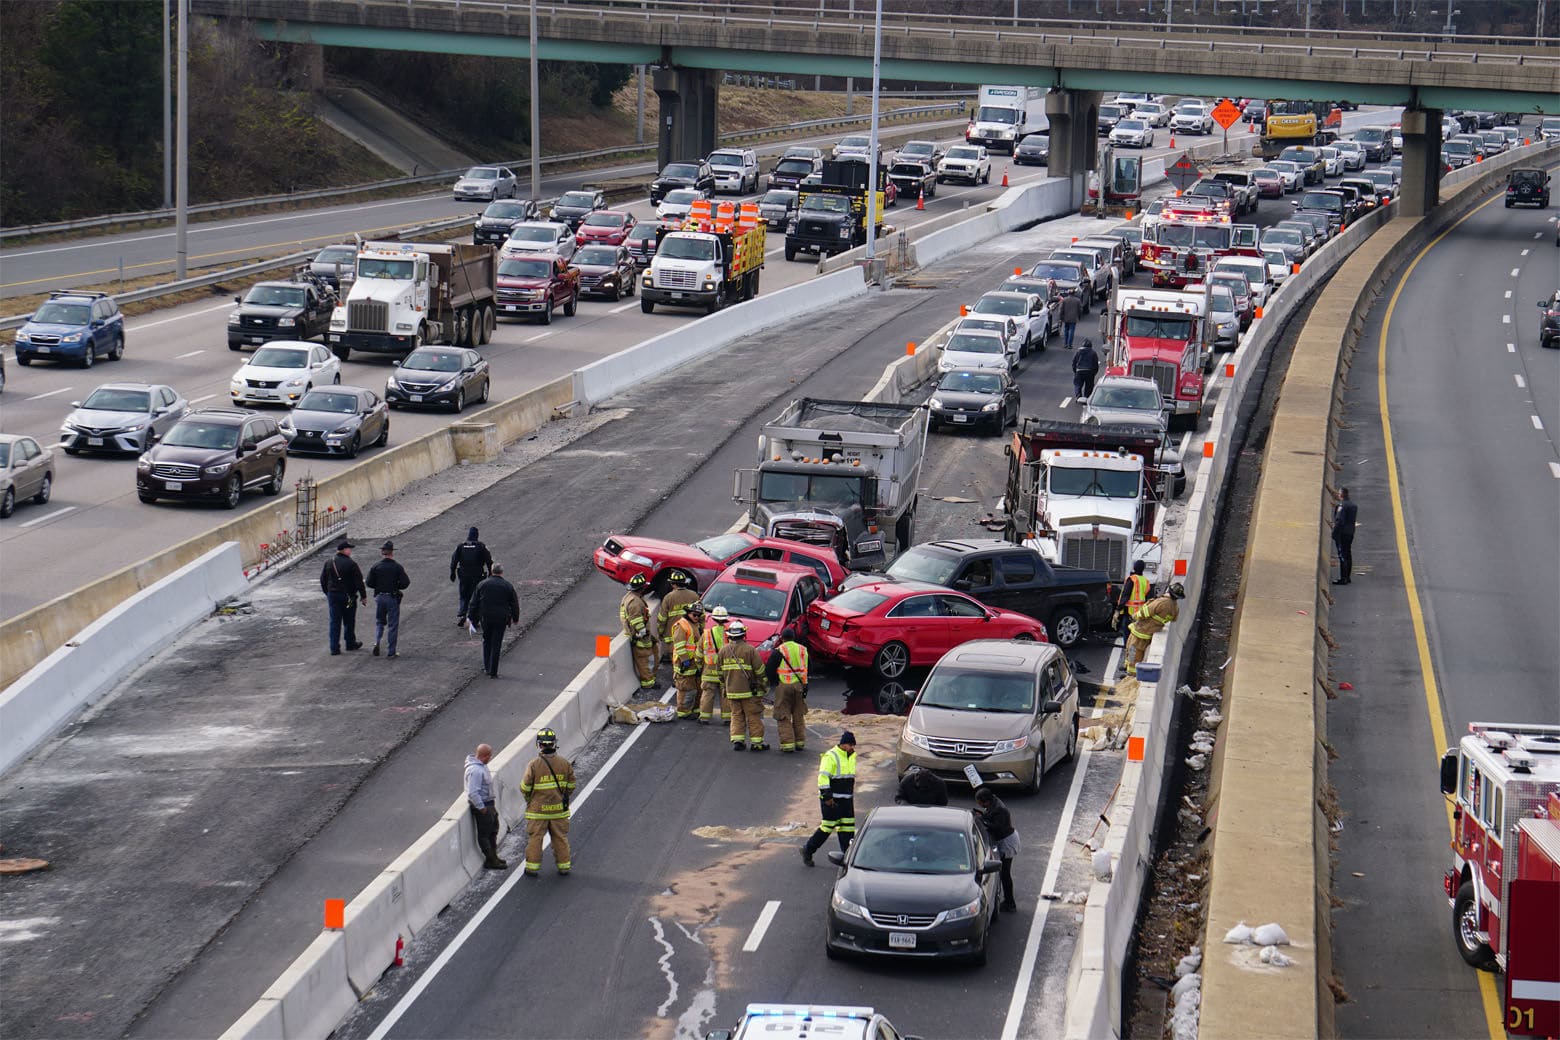 The crash caused backups behind the crash as police worked to divert traffic. (Courtesy Thomas Philibin/Live Wire Media Relations)